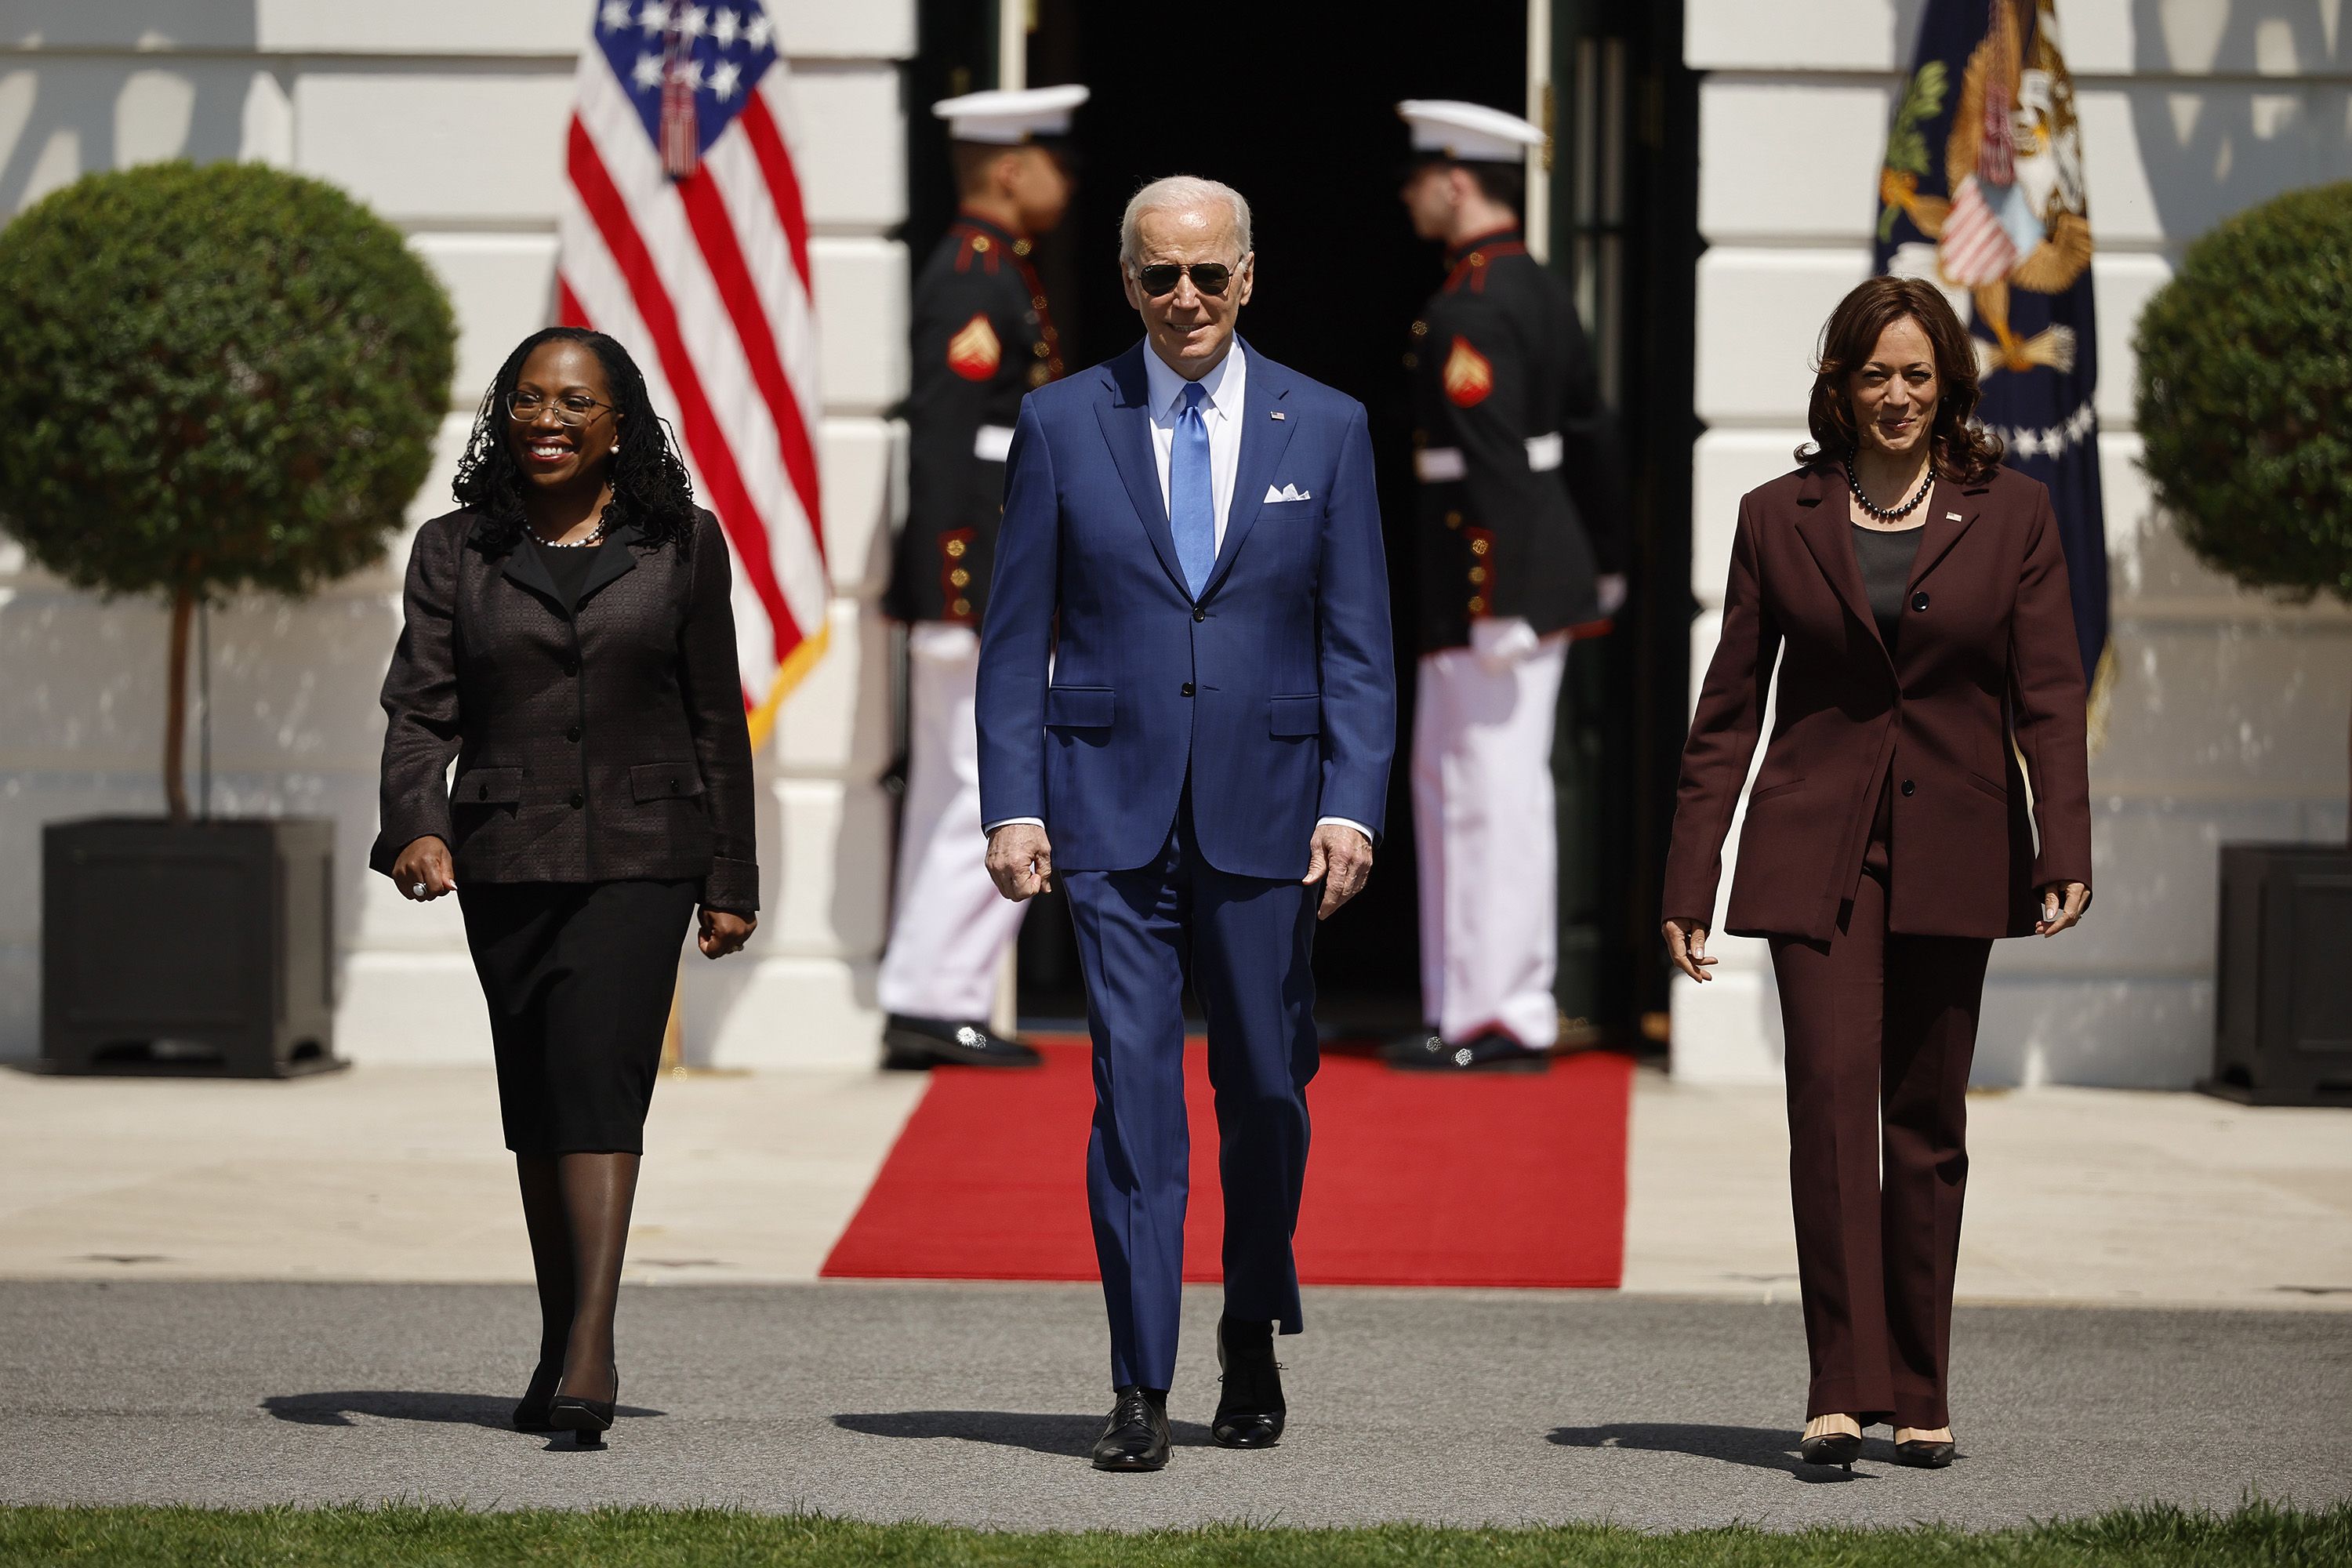 Judge Ketanji Brown Jackson, President Joe Biden and Vice President Kamala Harris walk out of the White House for an event celebrating Jackson's confirmation to the U.S. Supreme Court on the South Lawn on April 8, in Washington, DC.